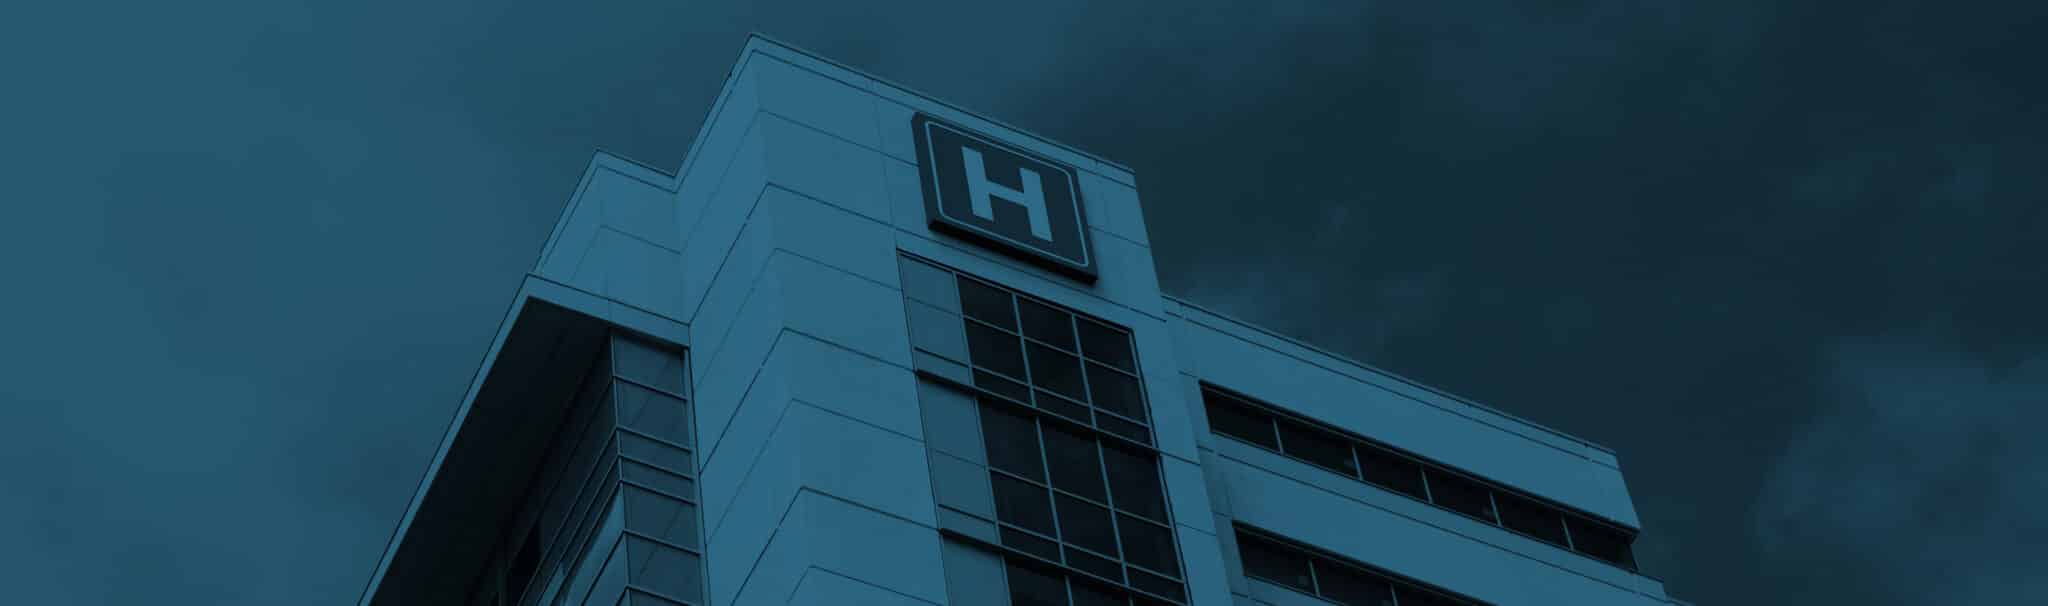 Consolidation within the hospital industry is akin to a tidal wave. As independent hospitals struggle, they are forced to consider the safety of a larger system.